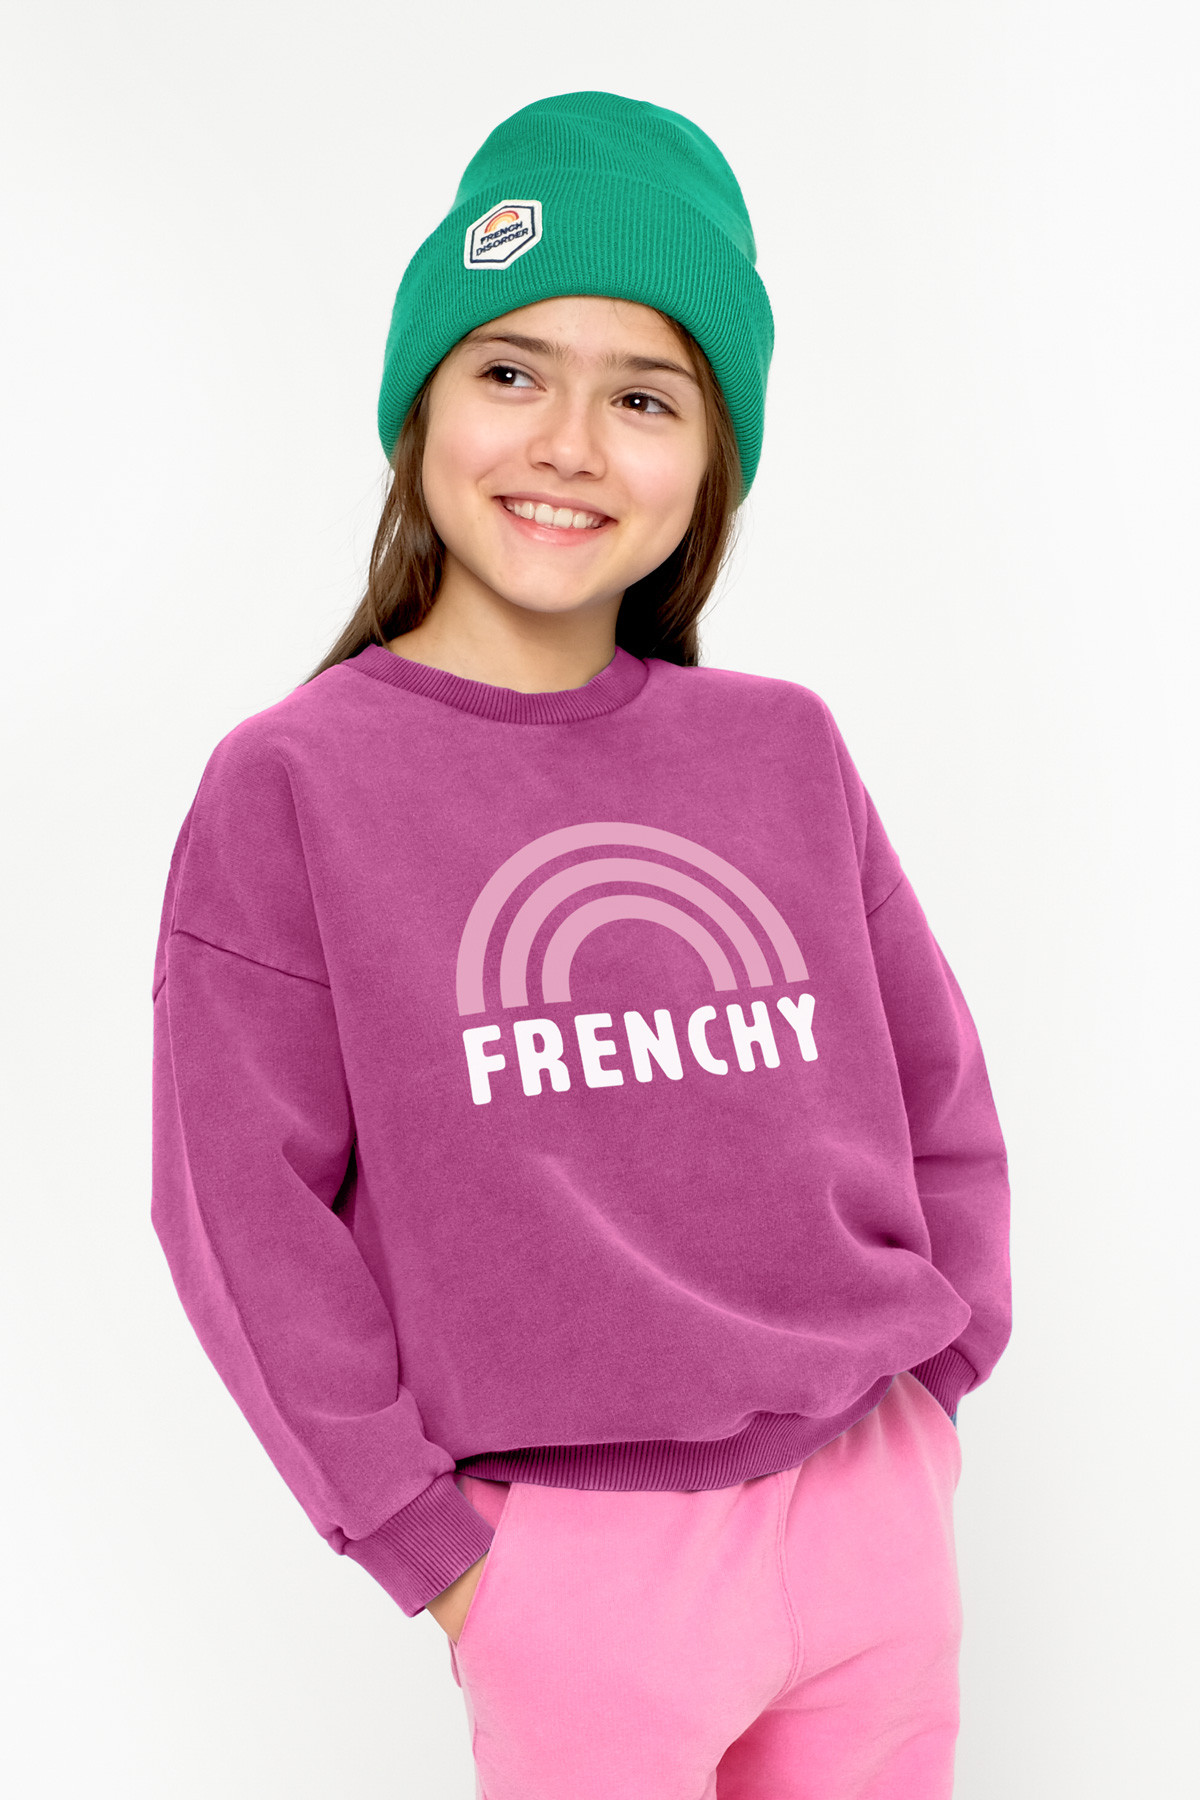 Sweat Max Washed FRENCHY - Grand modèle